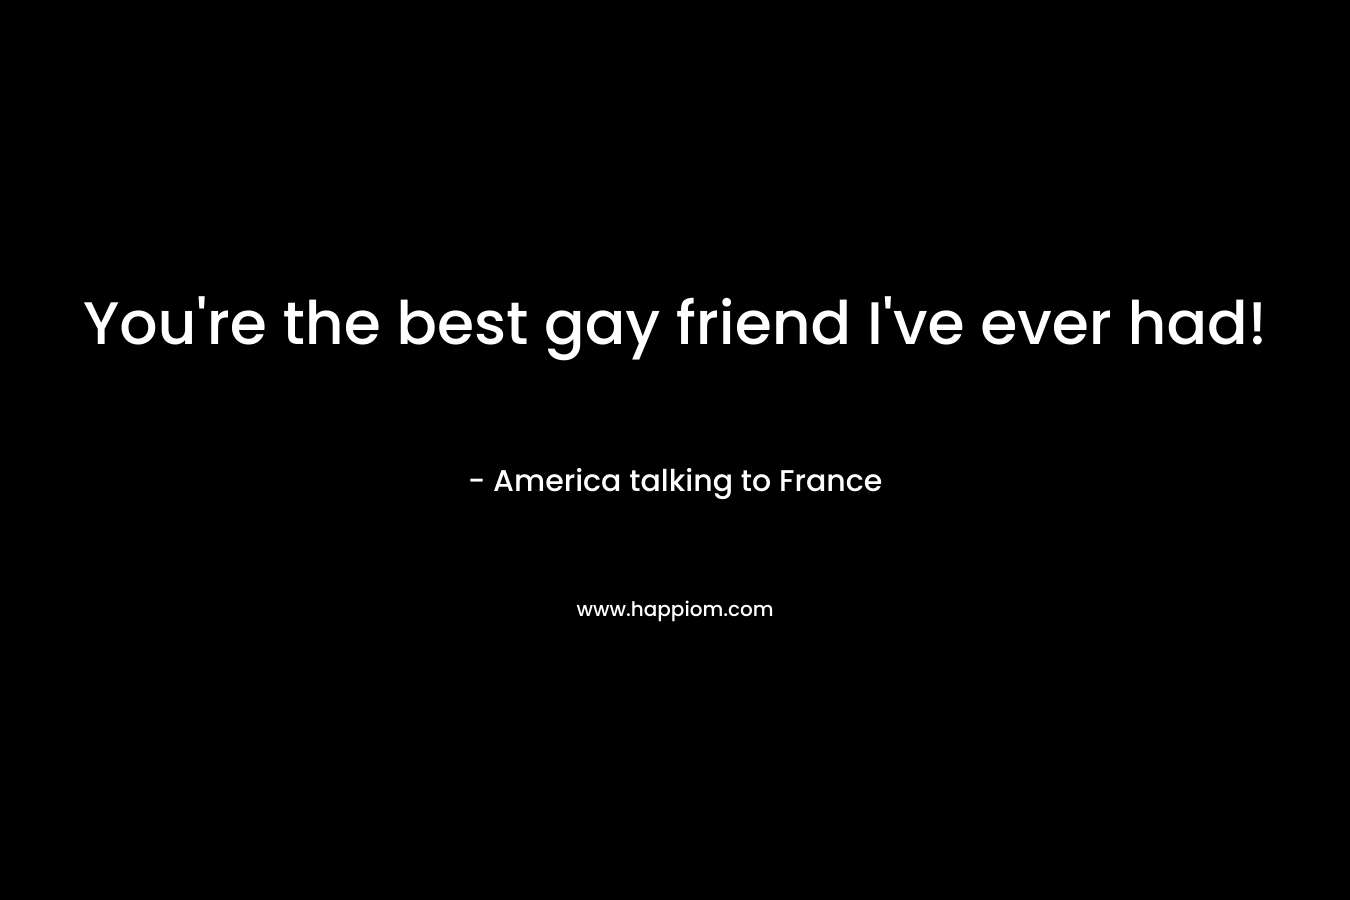 You're the best gay friend I've ever had!